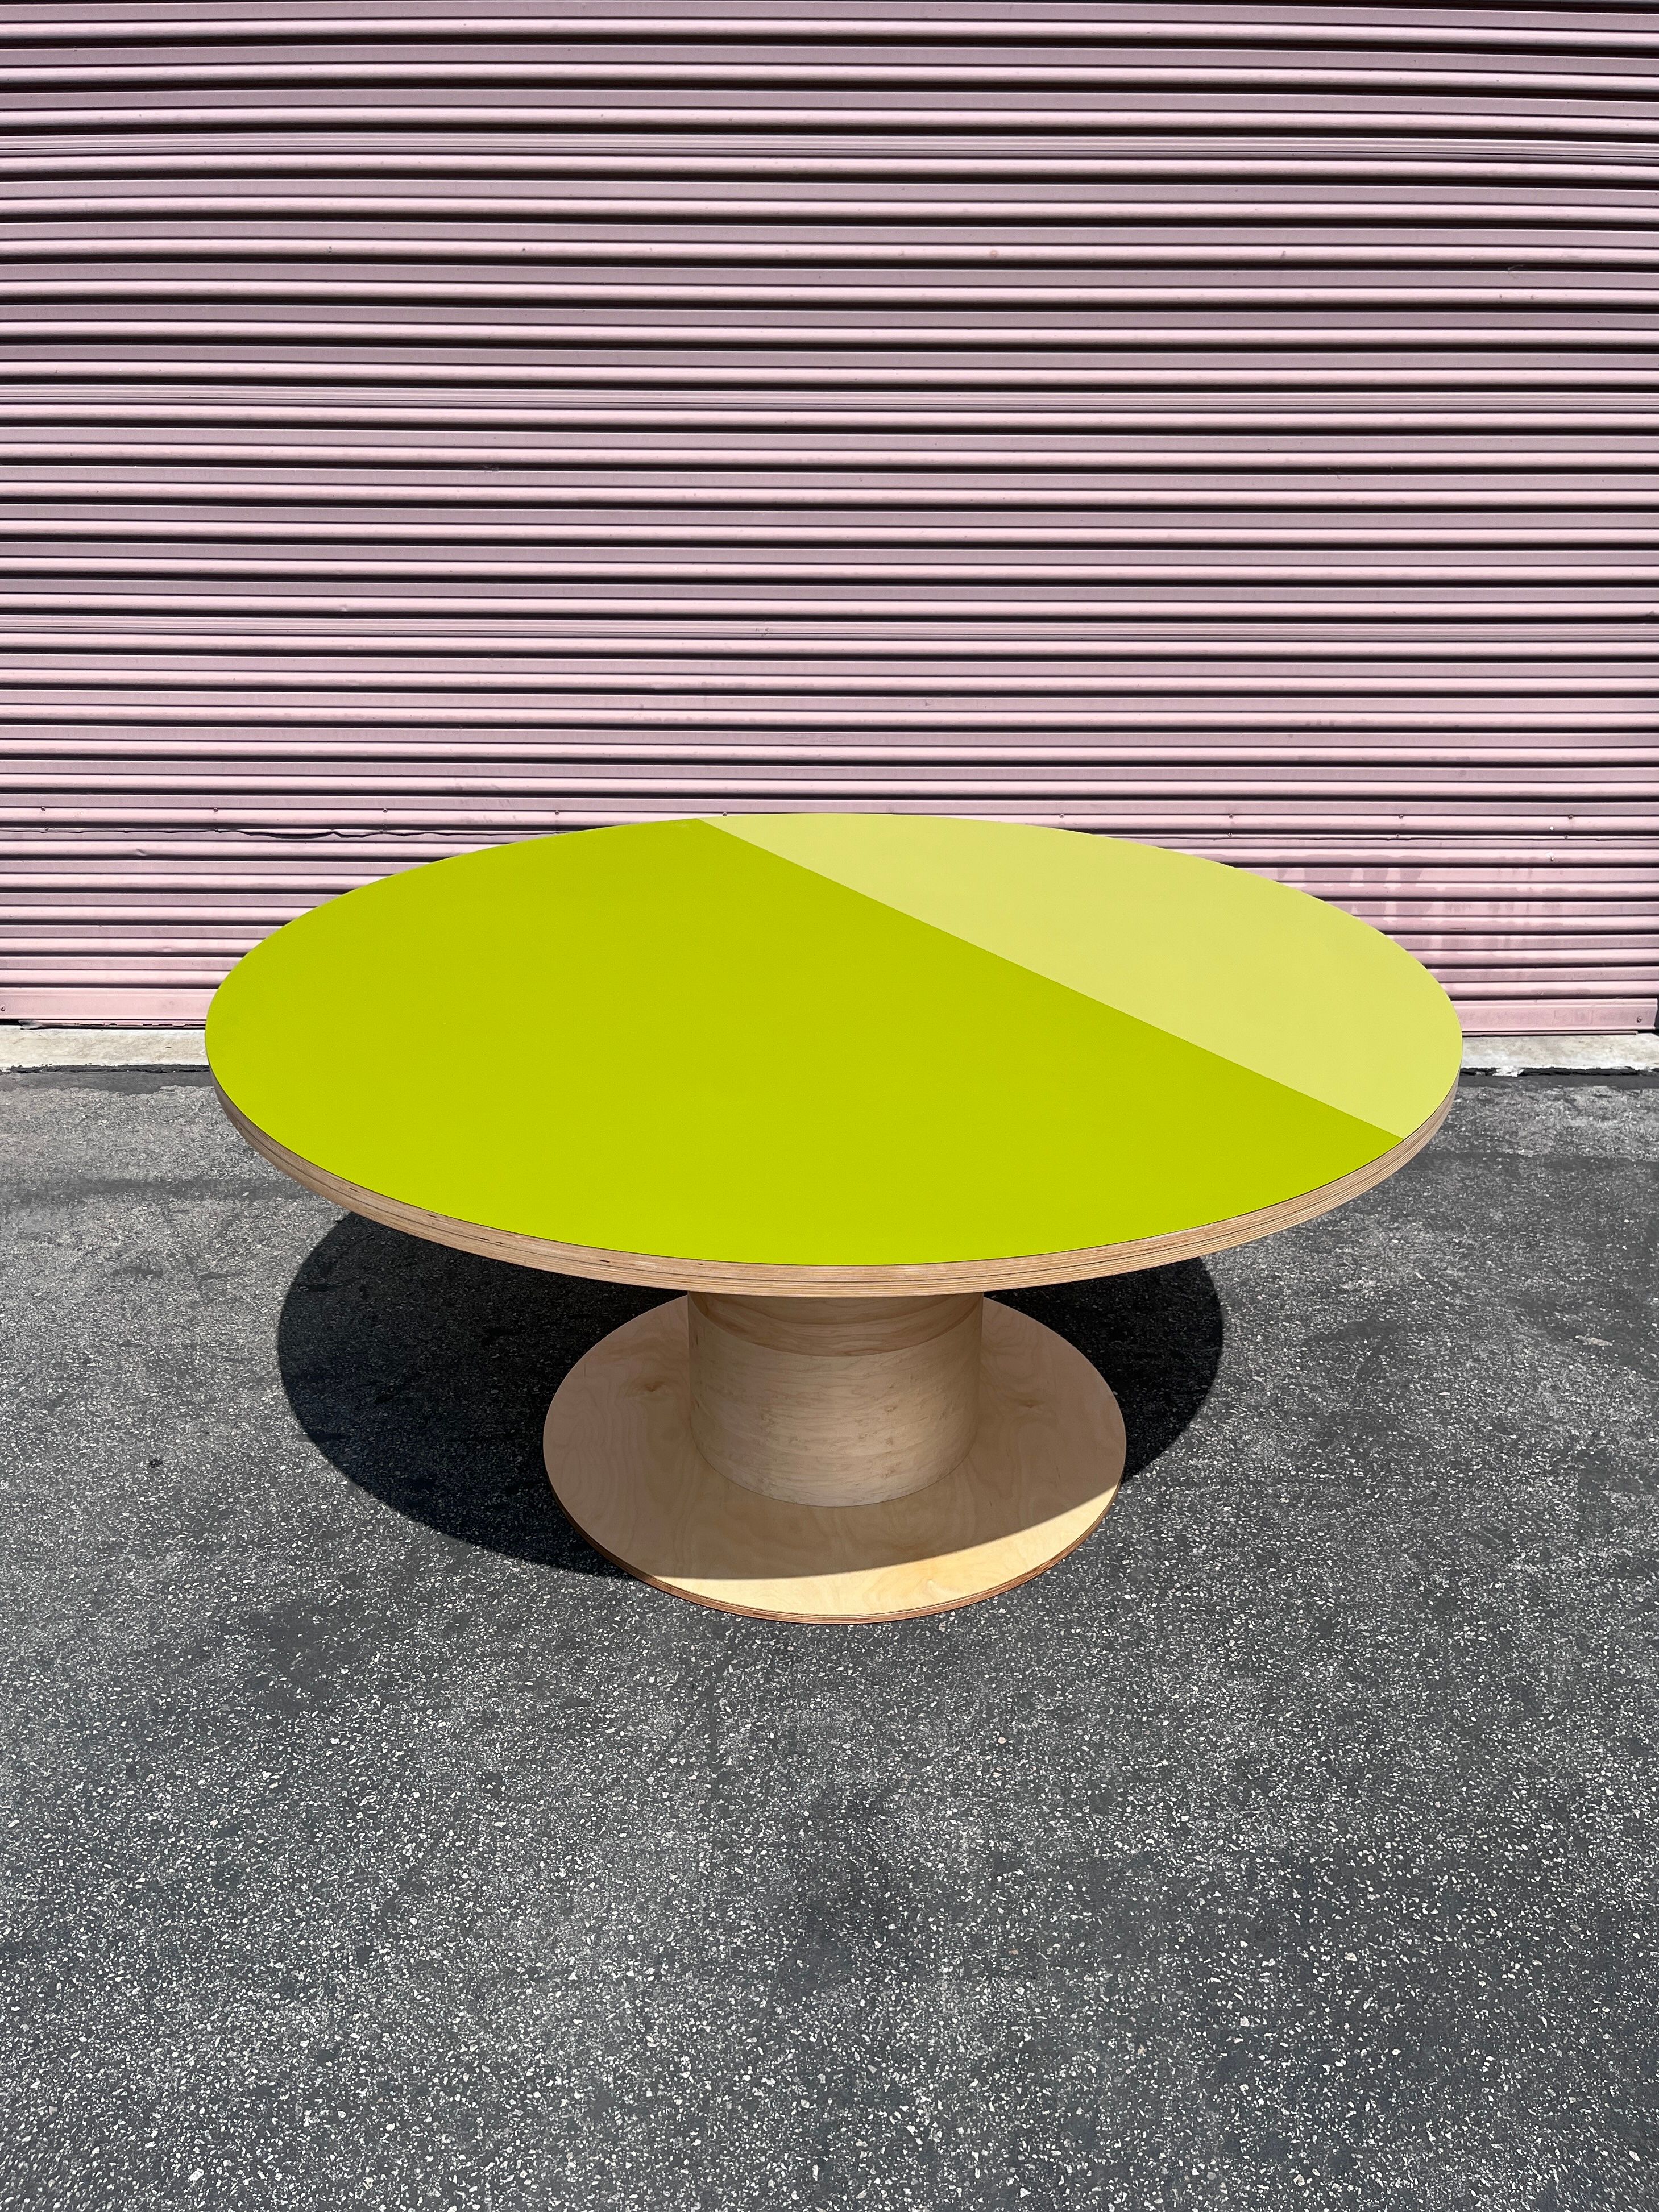  Two Tone Circle Table product image 3